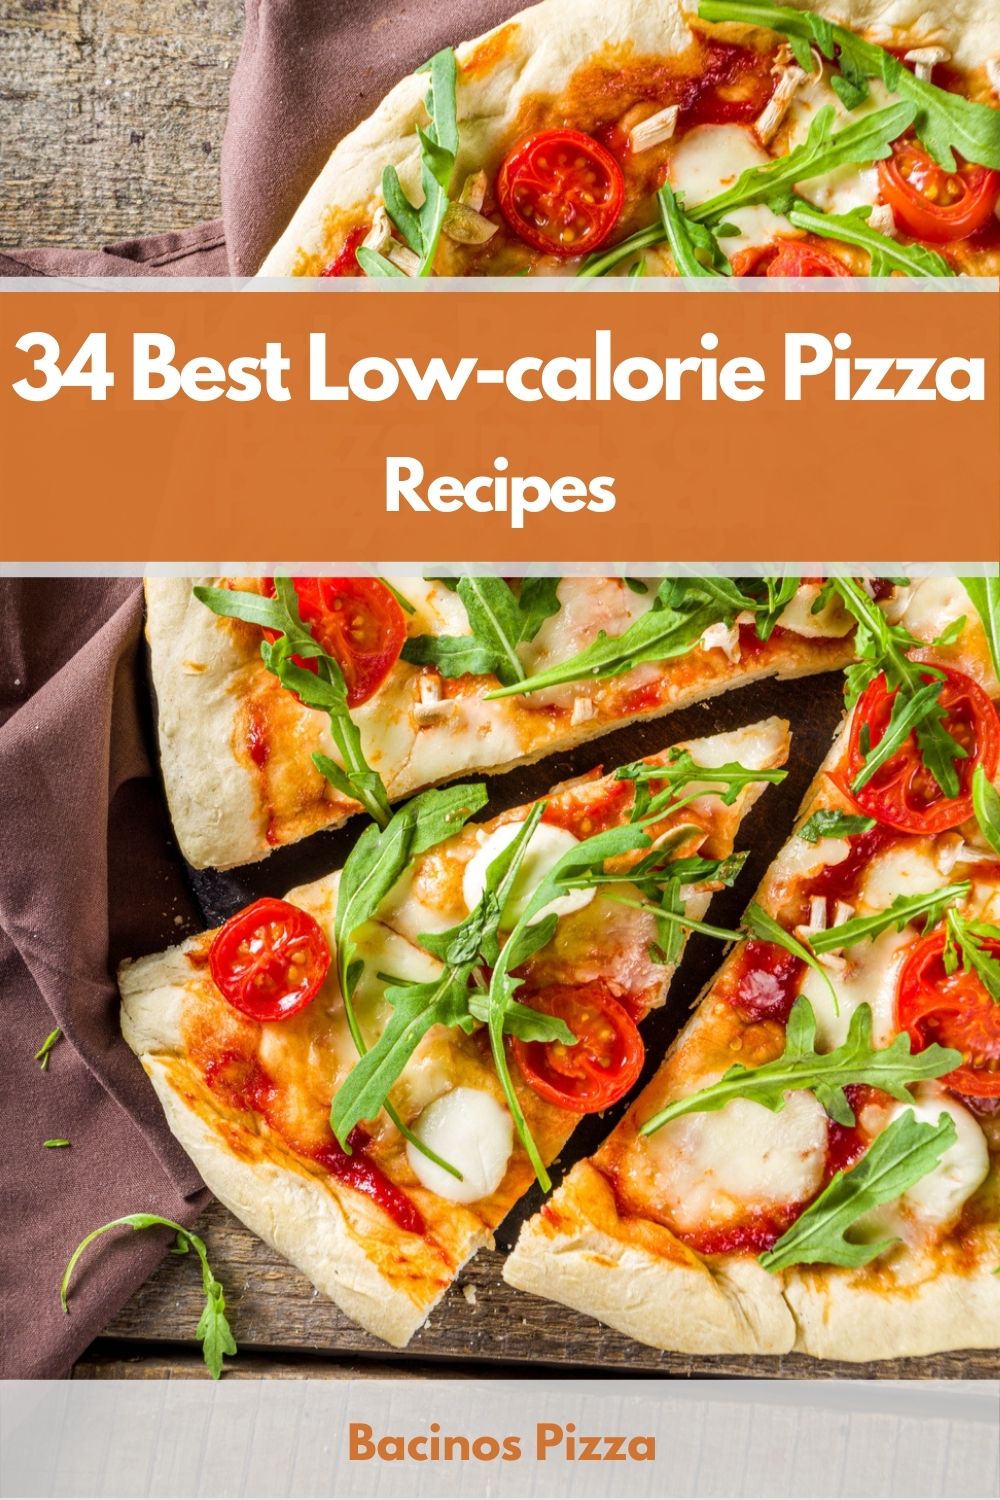 34 Best Low-calorie Pizza Recipes pin